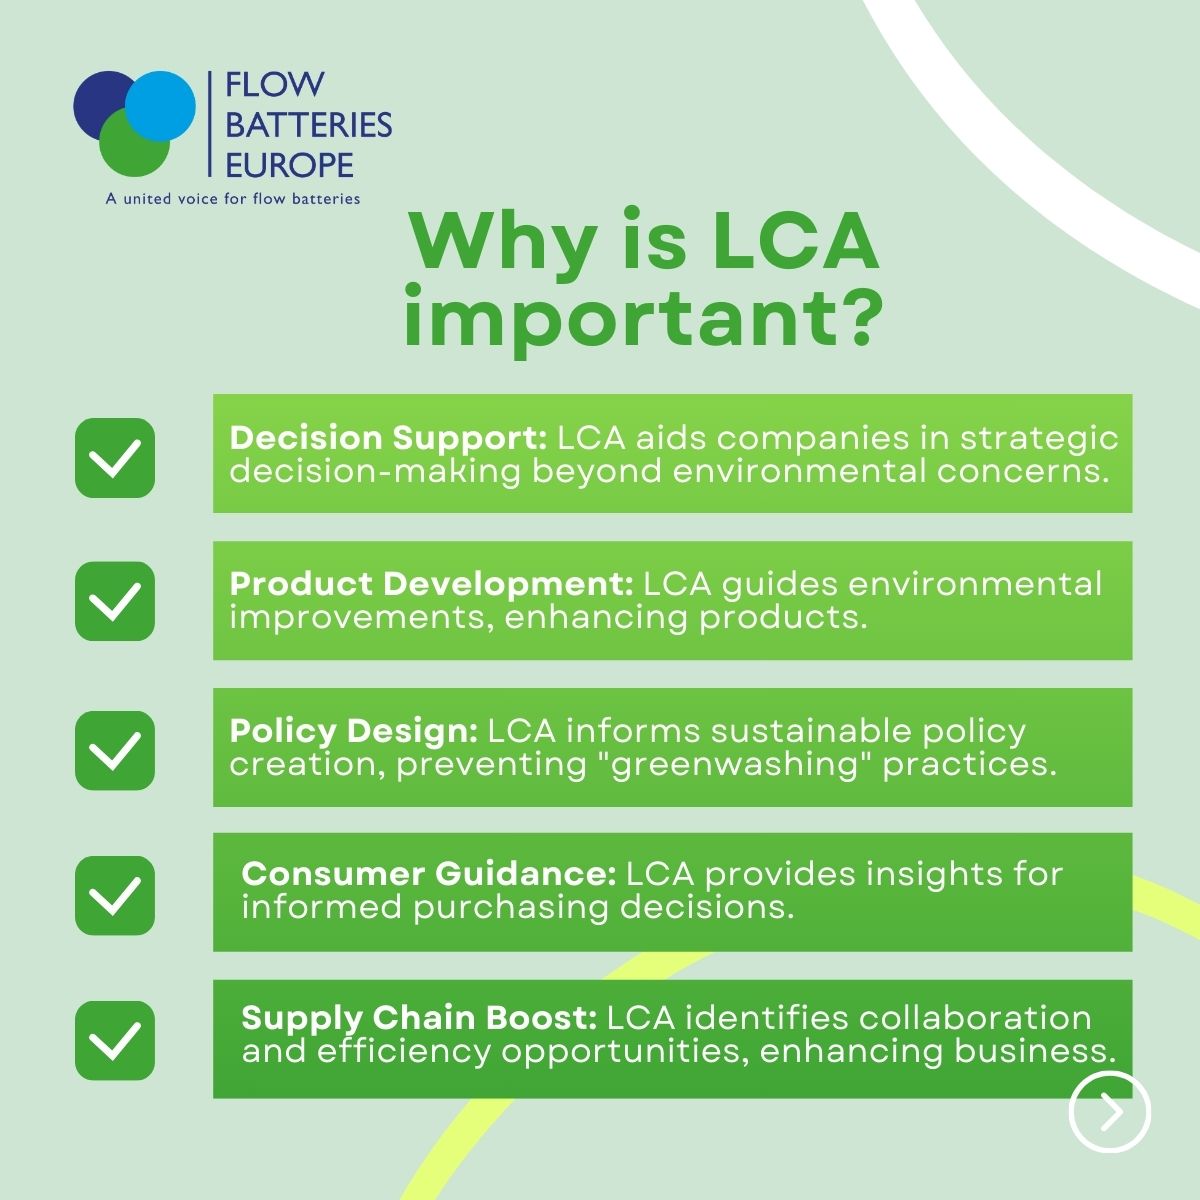 Are you familiar with Life Cycle Assessment (LCA) methods to determine the carbon footprint of flow batteries. 👣 LCA studies are valuable tools for evaluating the environmental impact of products and technologies, identifying improvement opportunities to benefit the planetv ⬇️